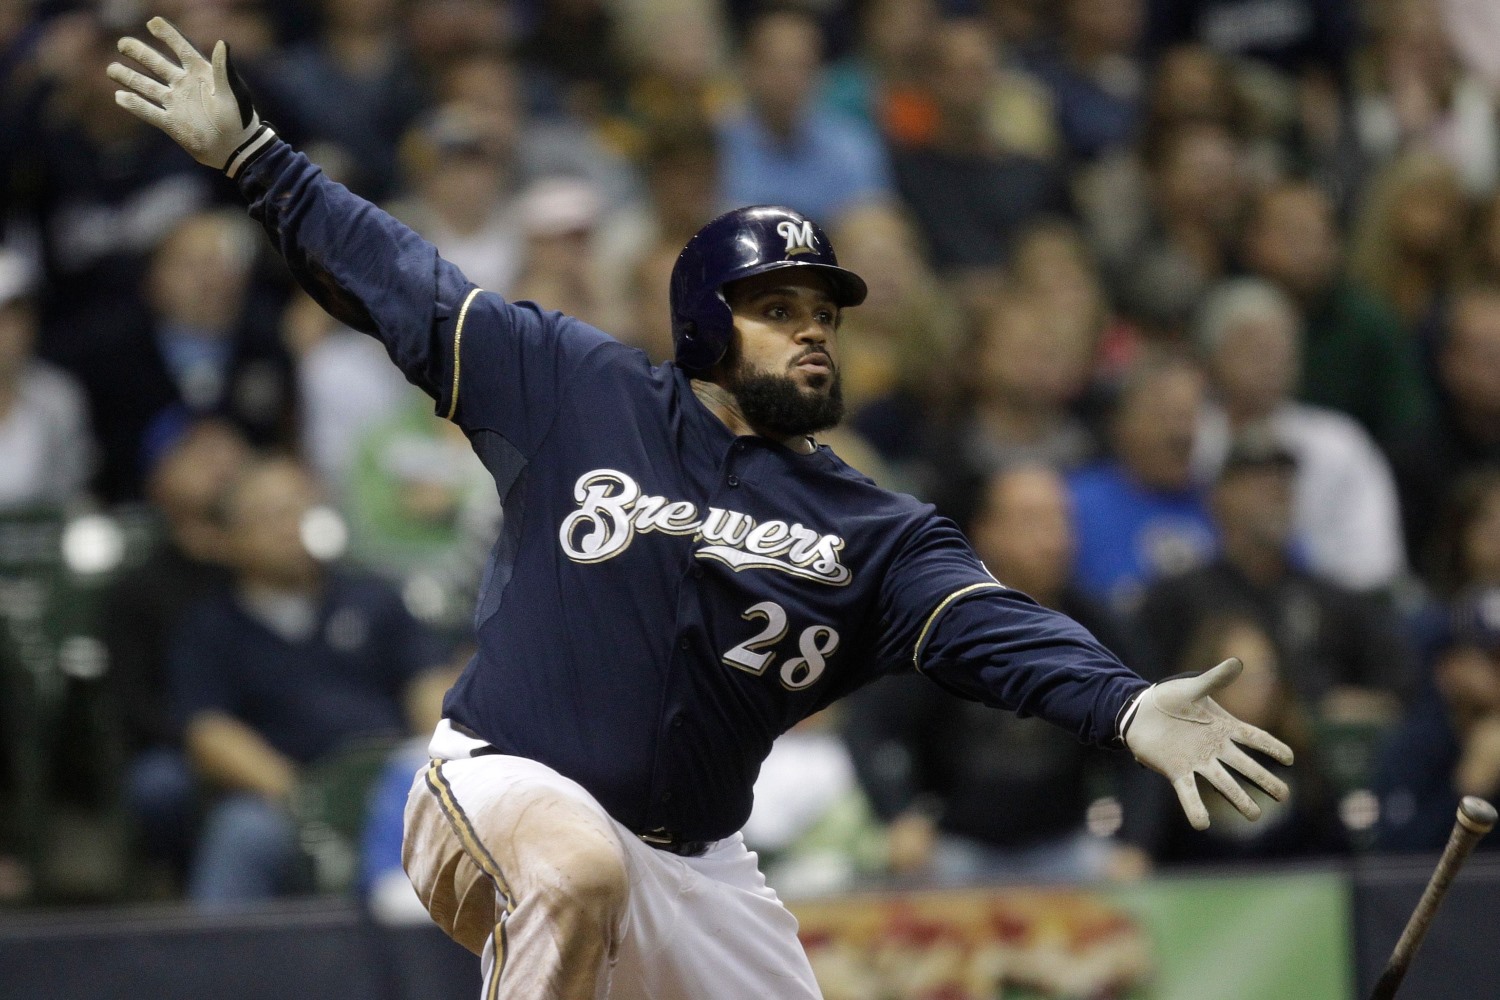 Black History Month: Prince Fielder's Brewers Legacy - Brewers